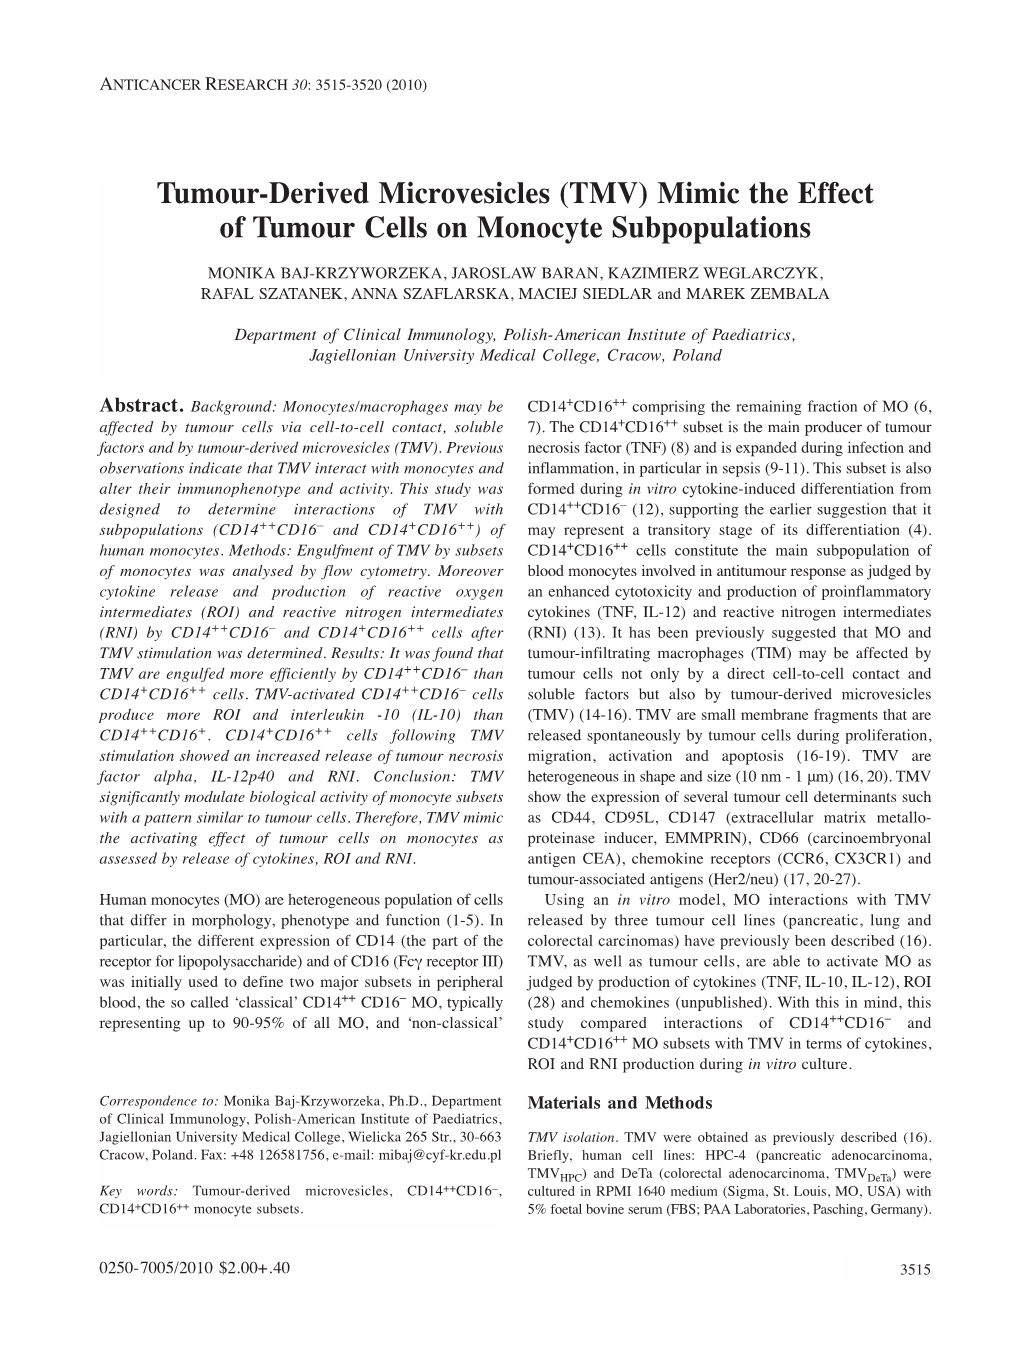 Tumour-Derived Microvesicles (TMV) Mimic the Effect of Tumour Cells on Monocyte Subpopulations